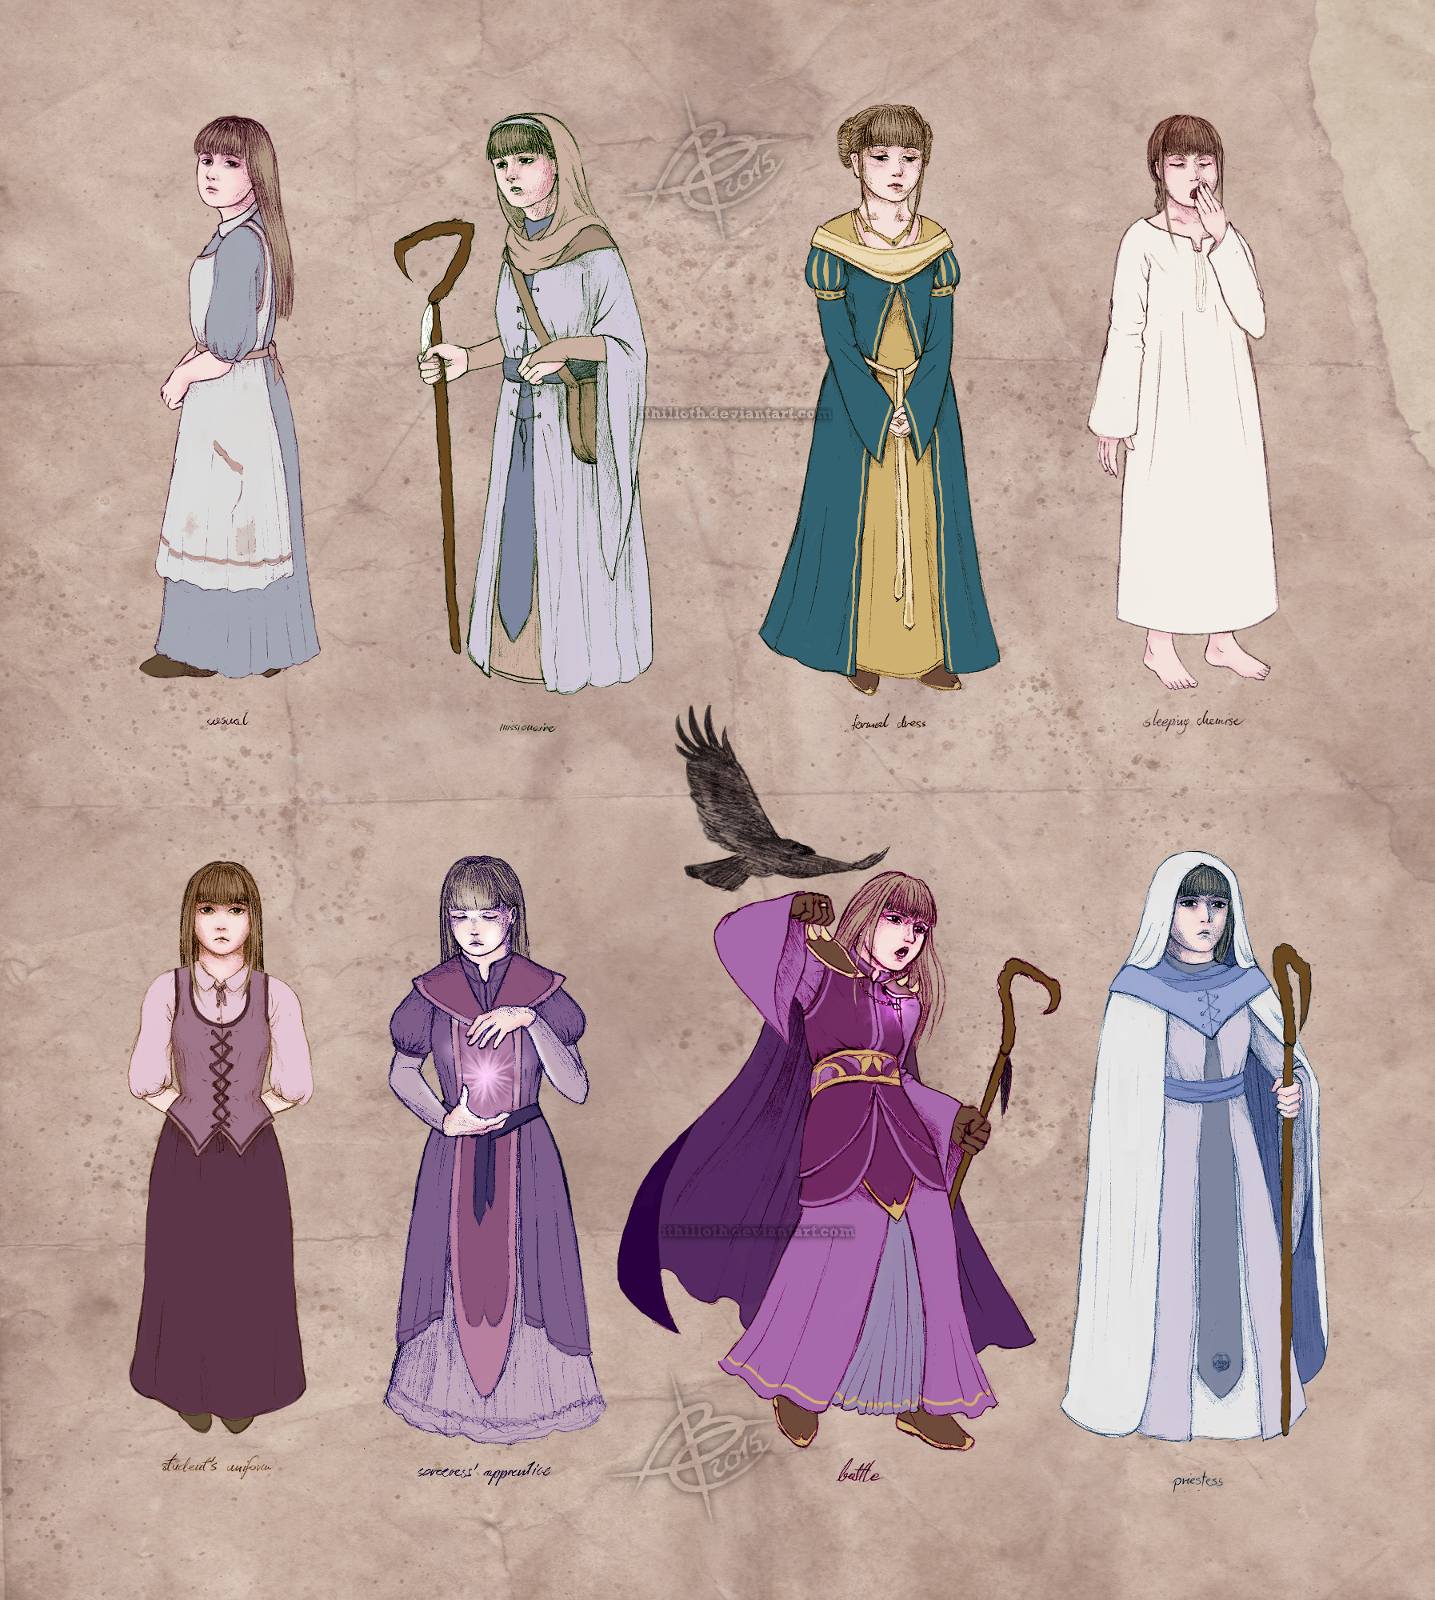 mage-cleric outfits / Rowena ref sheet by Ithilloth on ...